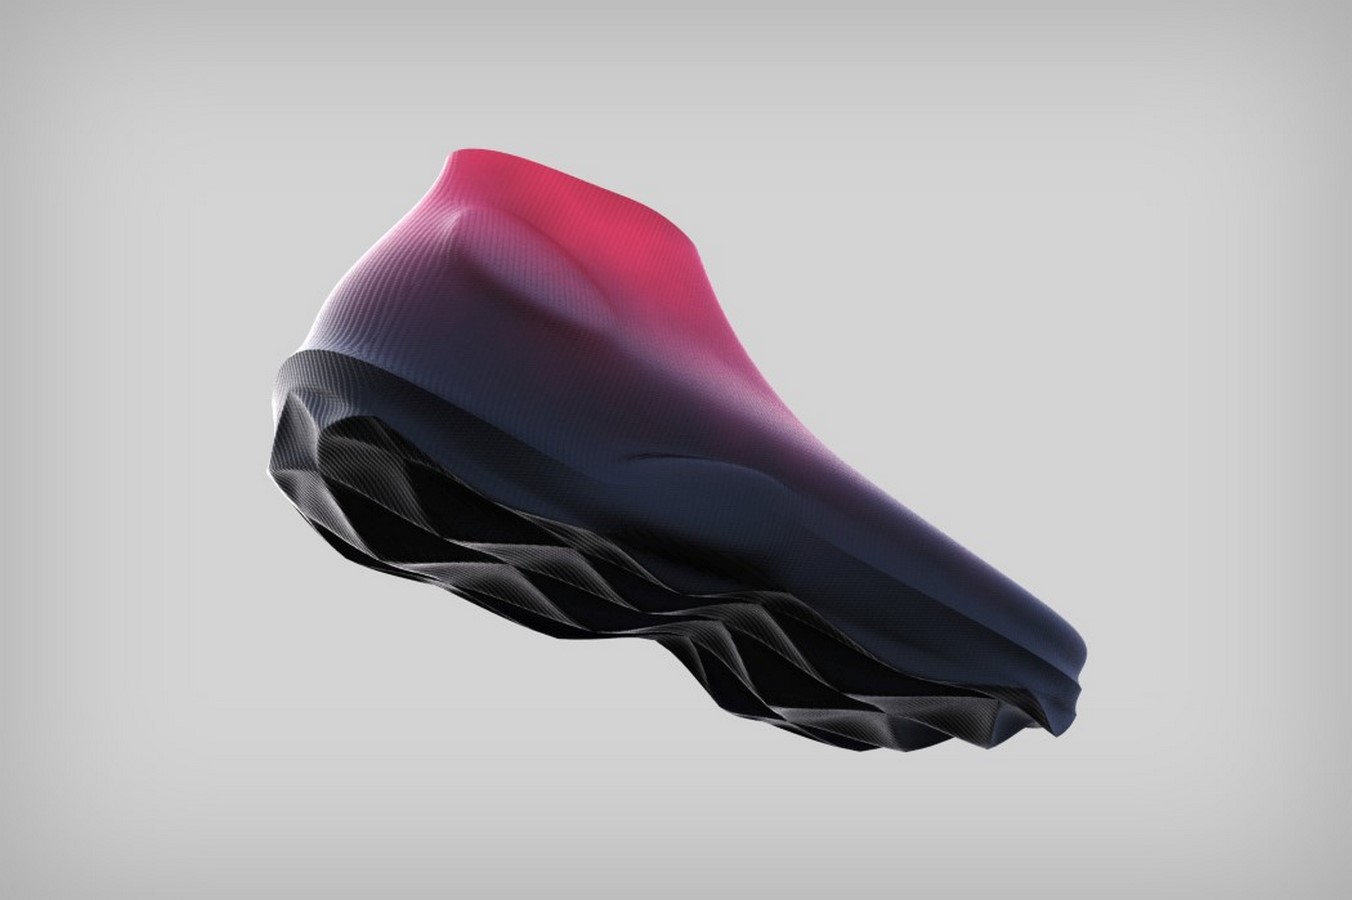 10 Shoe designs from the future Sheet1